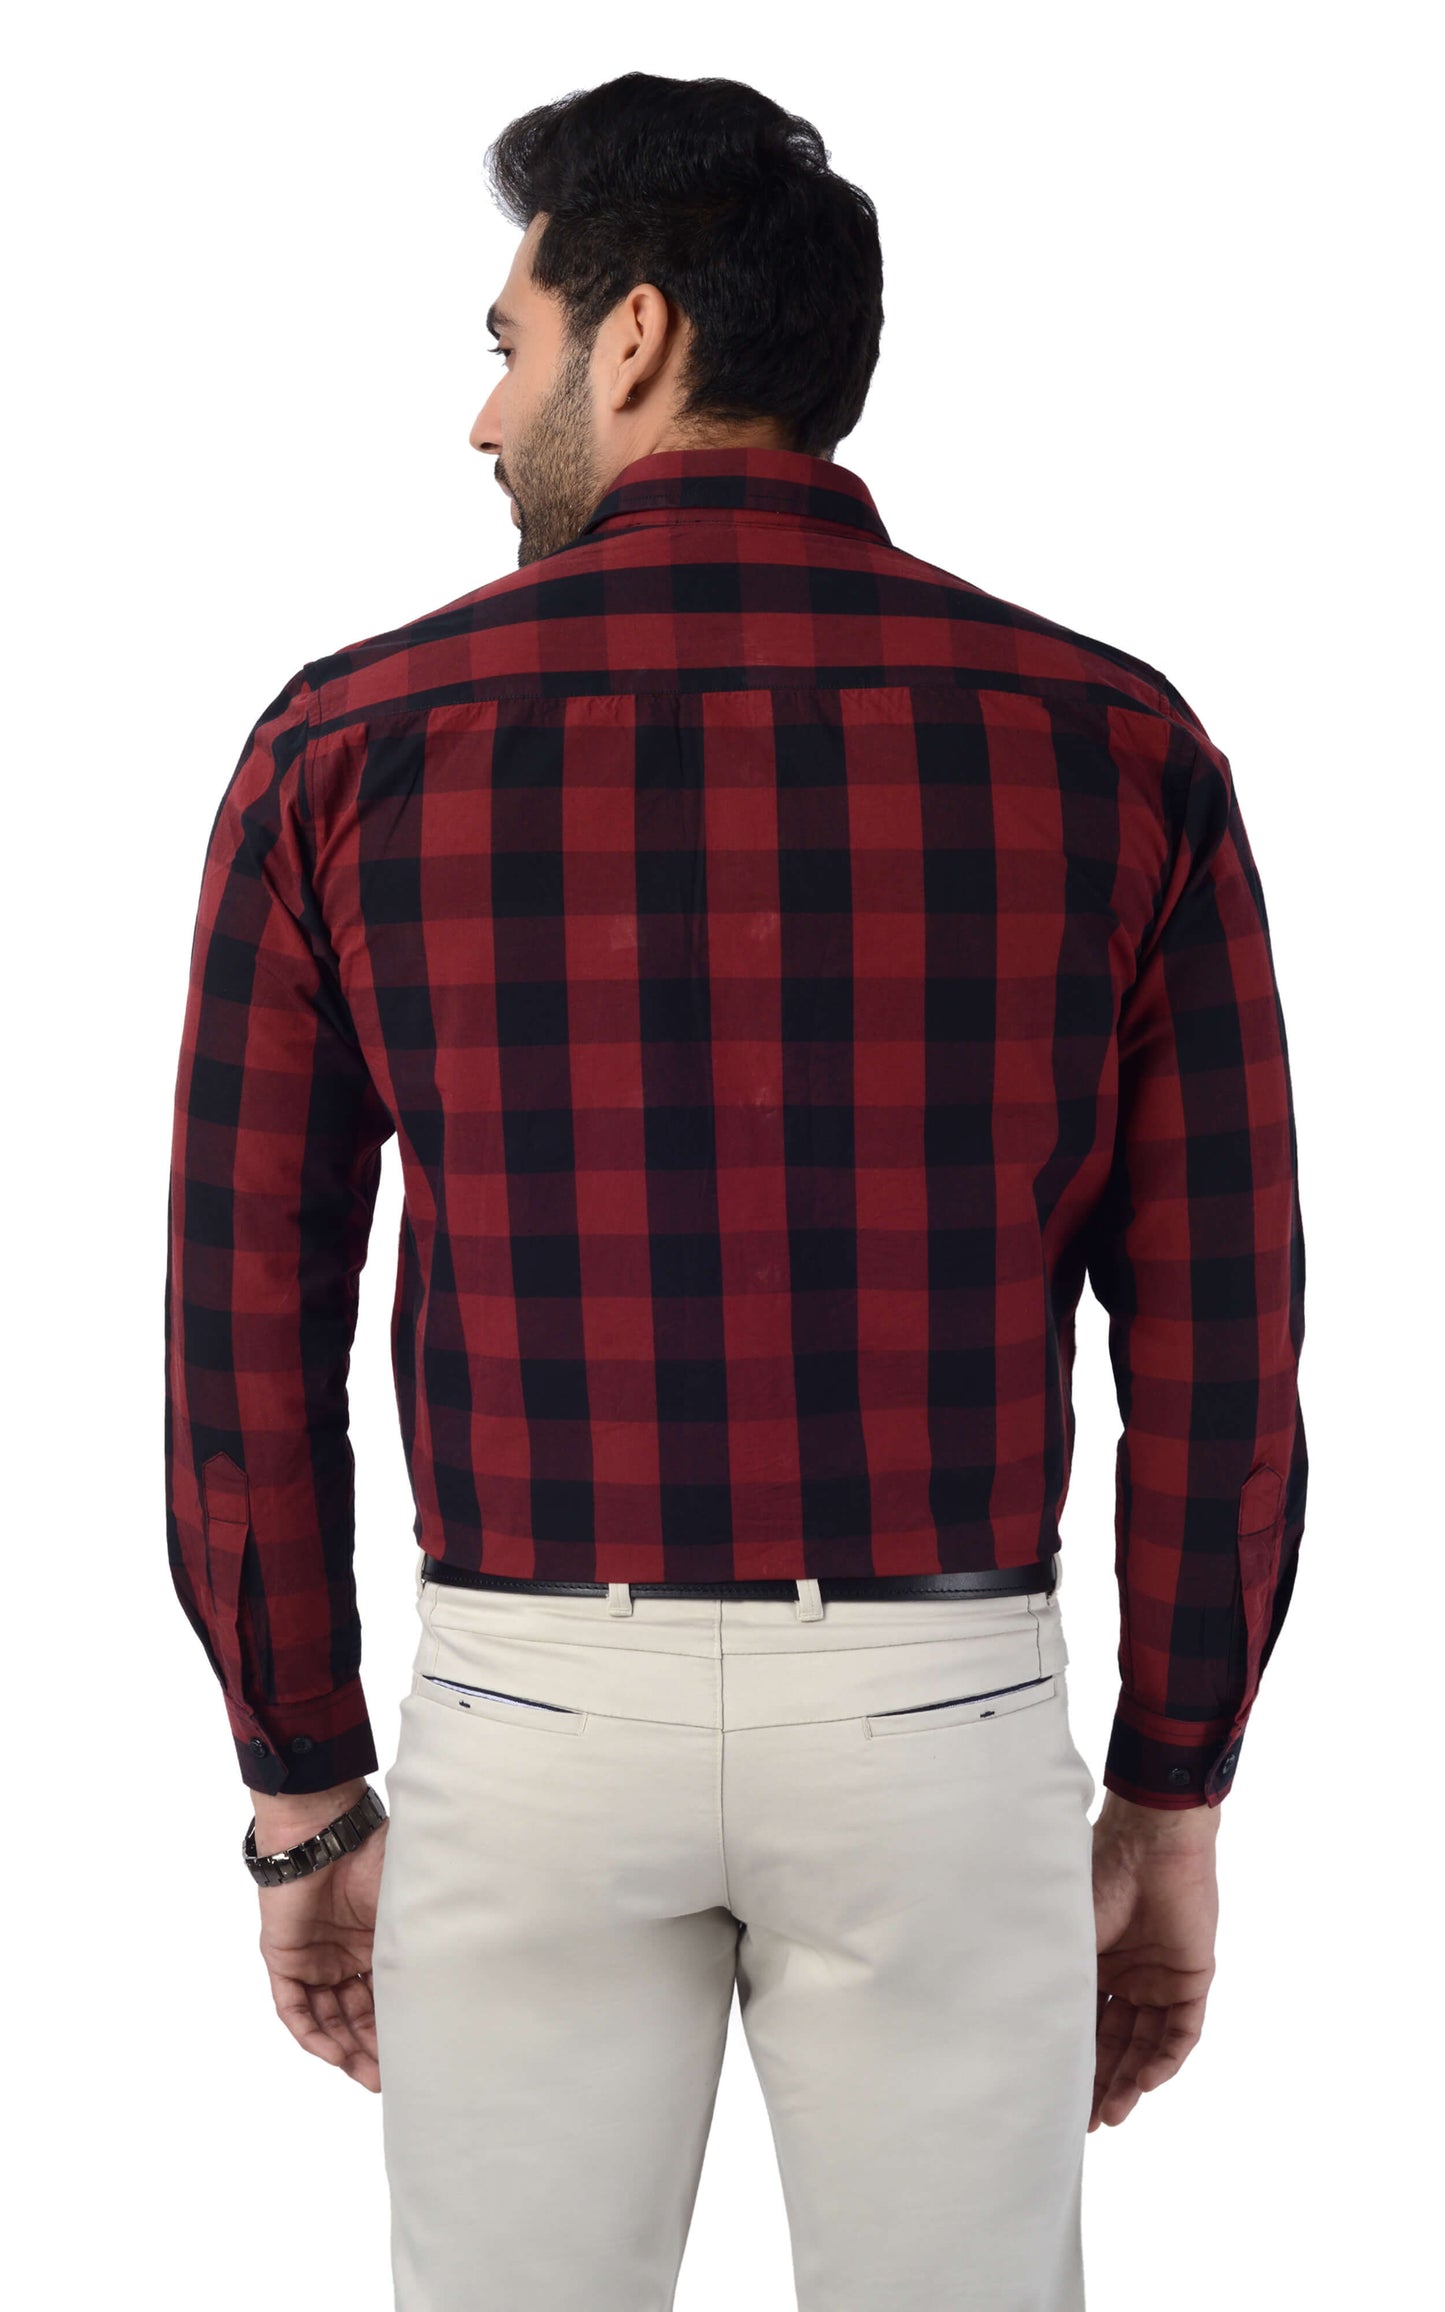 5thanfold Men's Casual Pure Cotton Full Sleeve Checkered Maroon Slim Fit Shirt